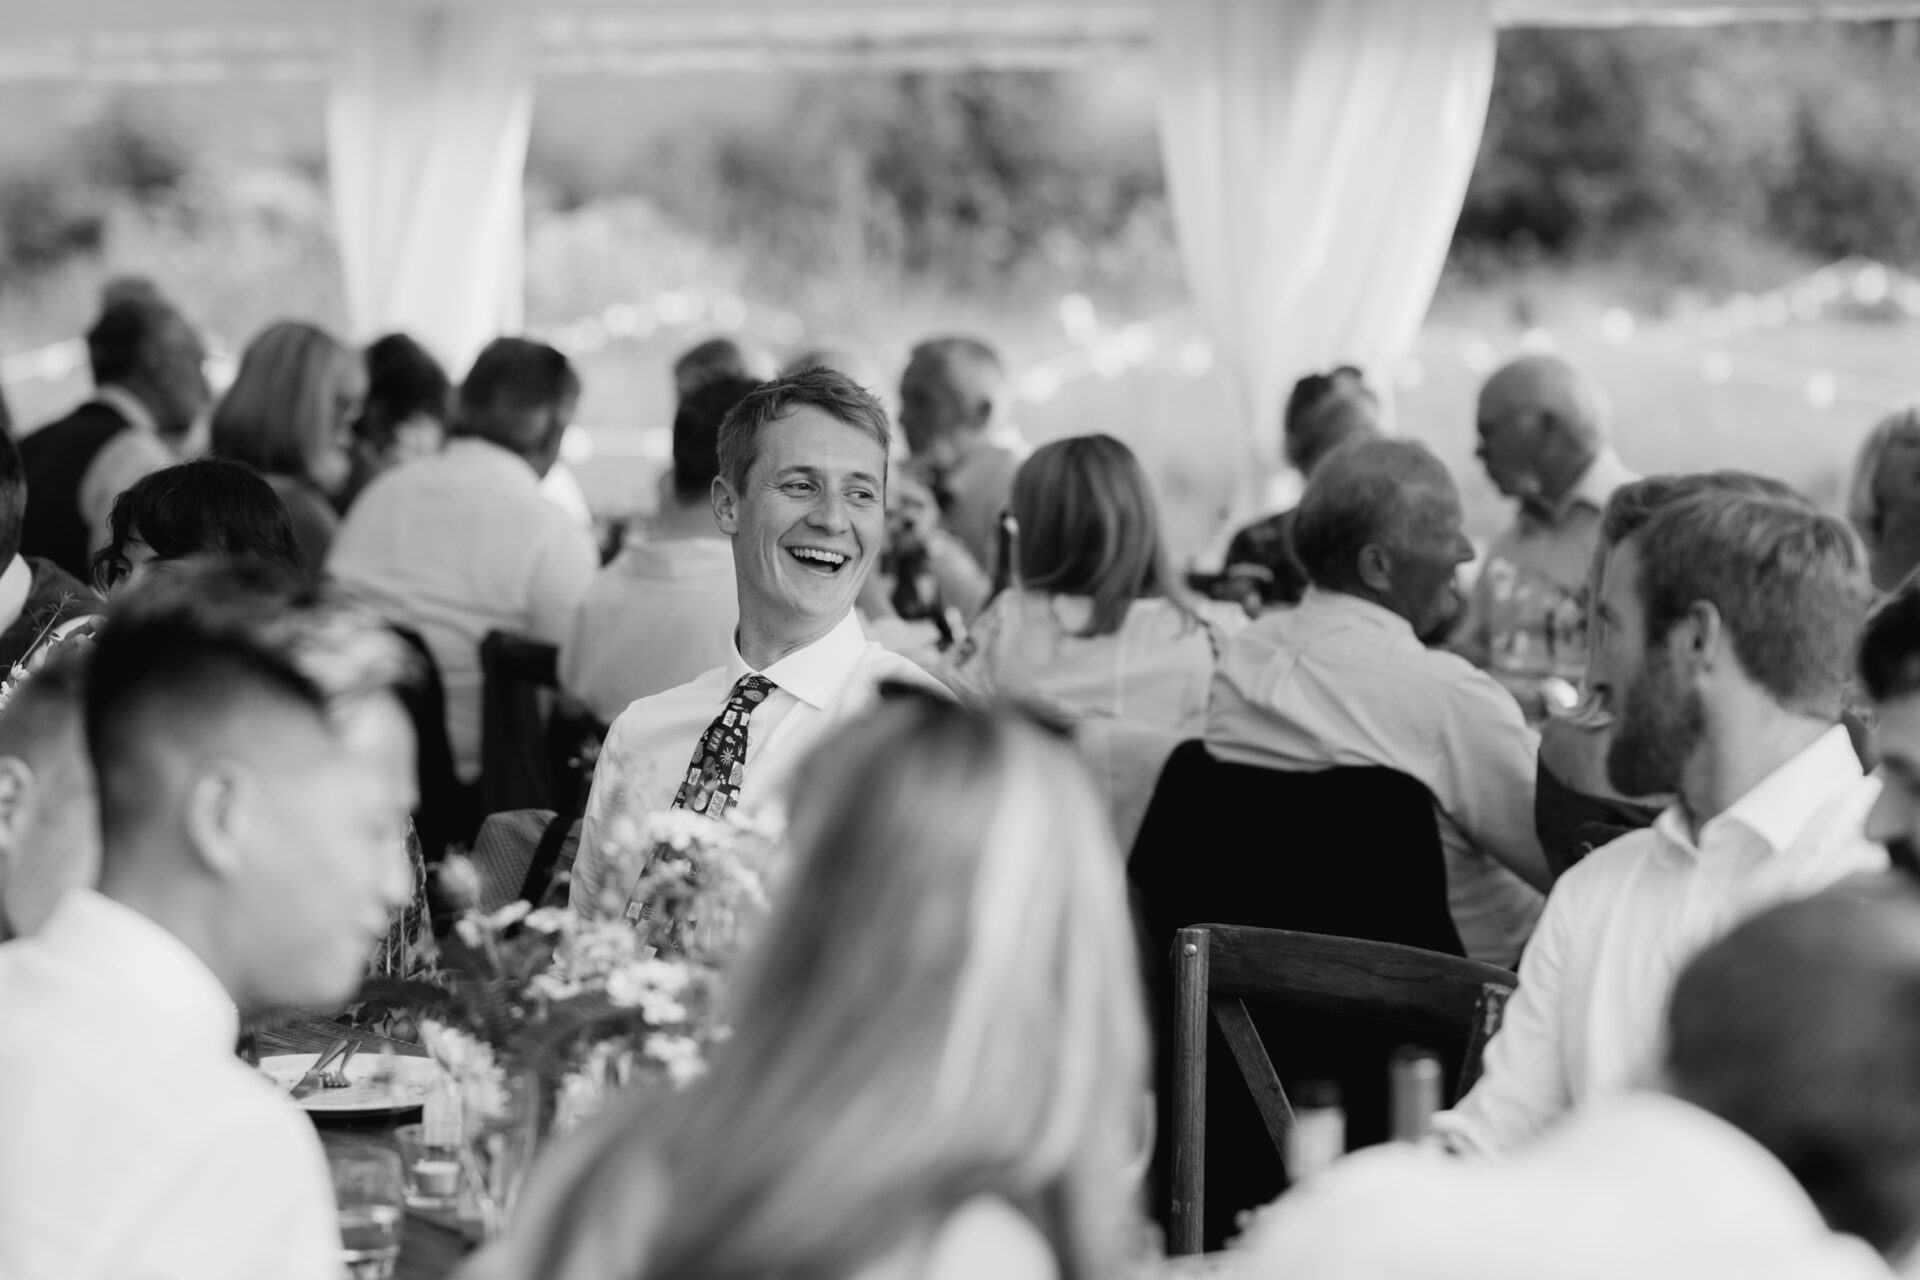 Wedding guests share a laugh during the wedding breakfast